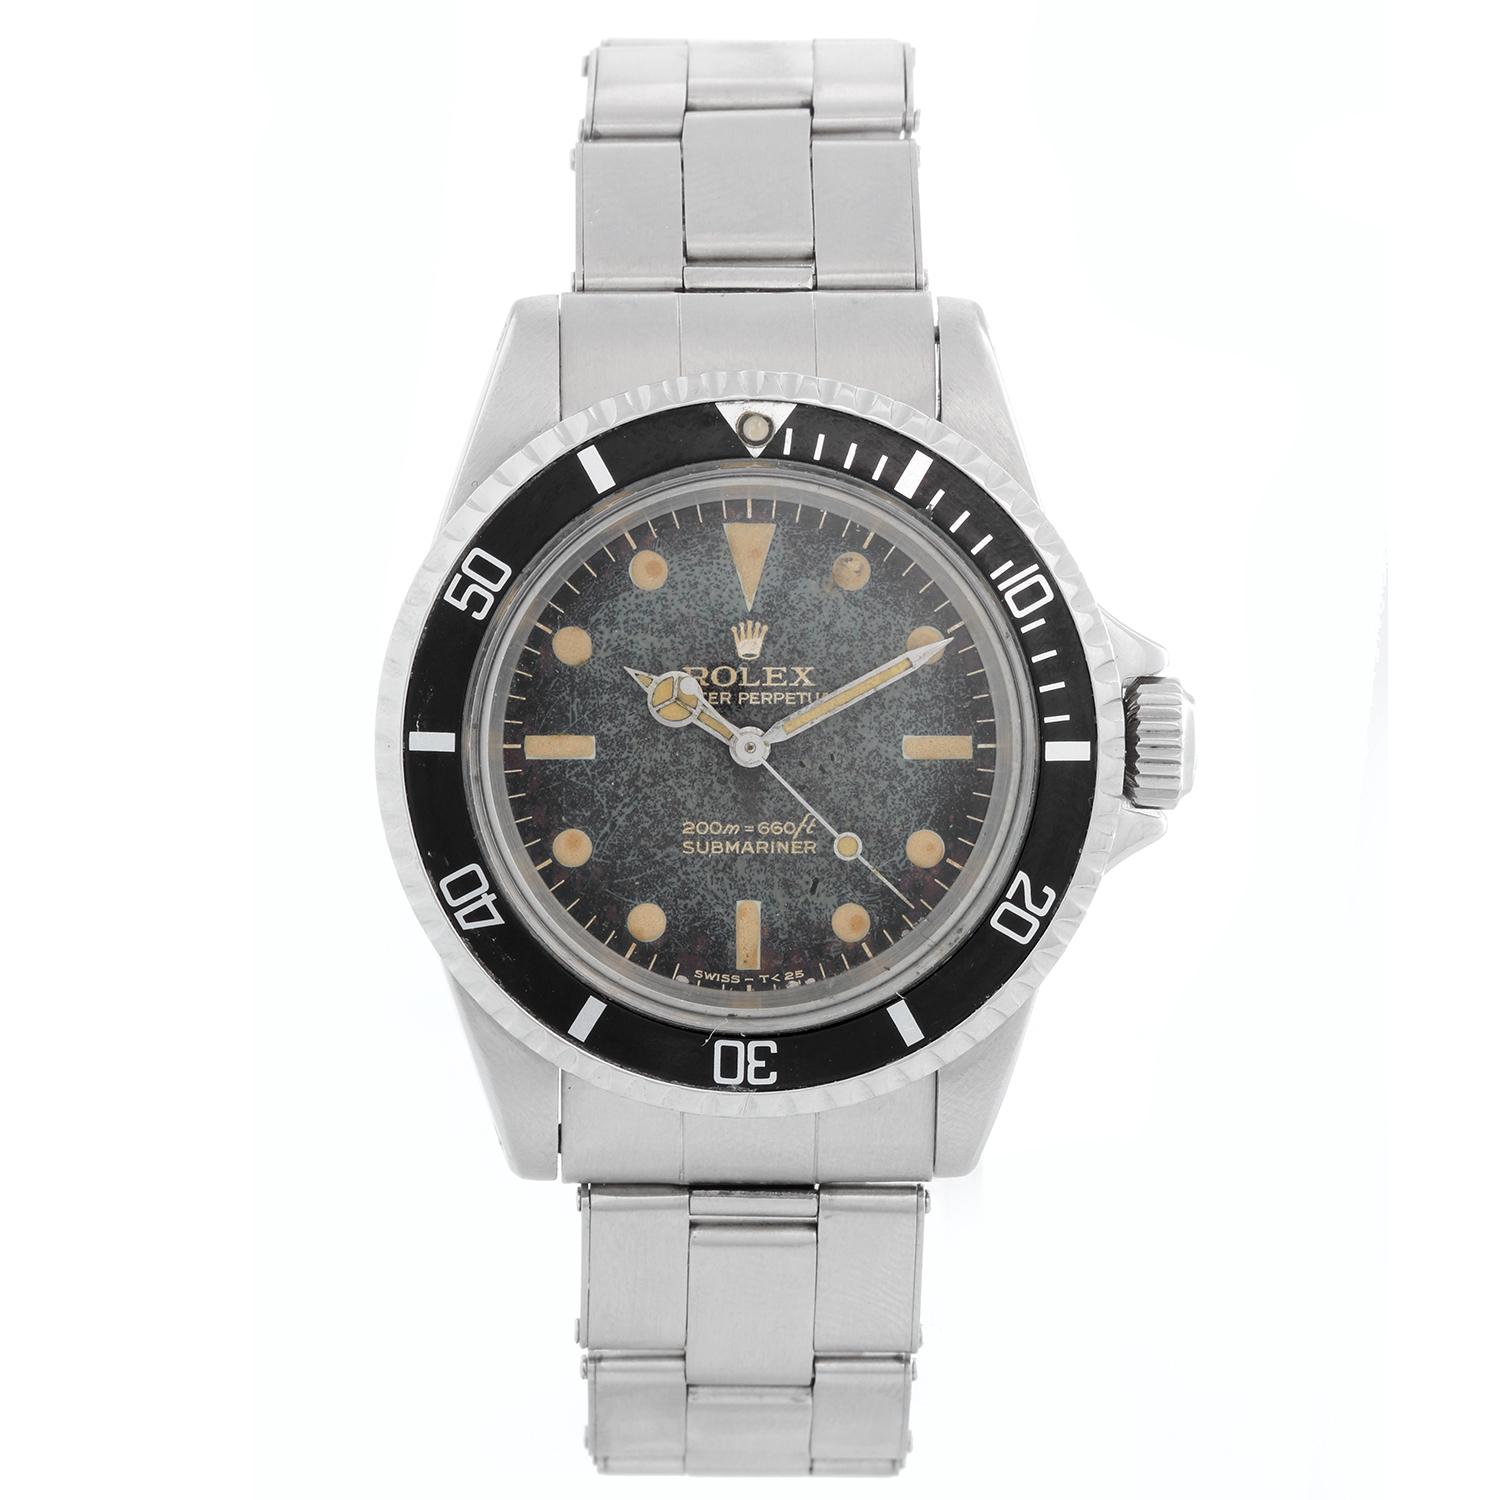 Vintage Rolex Submariner Gilt Dial Men's Automatic Watch 5513 - Automatic winding; acrylic crystal. Stainless steel case (41mm diameter). Black dial with all gilt lettering. Rolex Steel Bracelet. Pre-owned, vintage, ca. late 60's. Pre-owned with